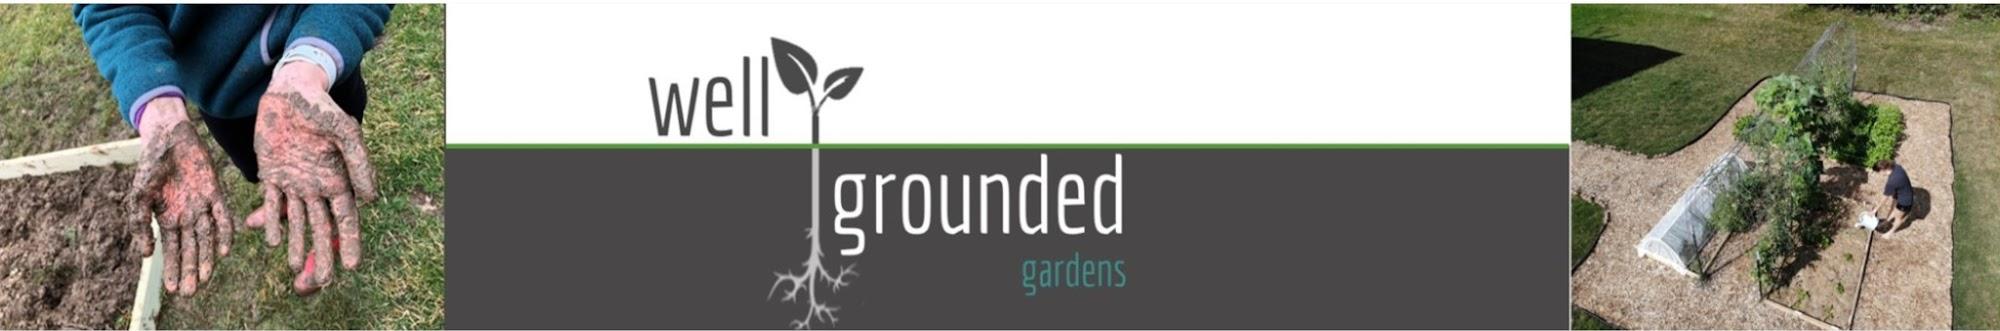 Well Grounded Gardens